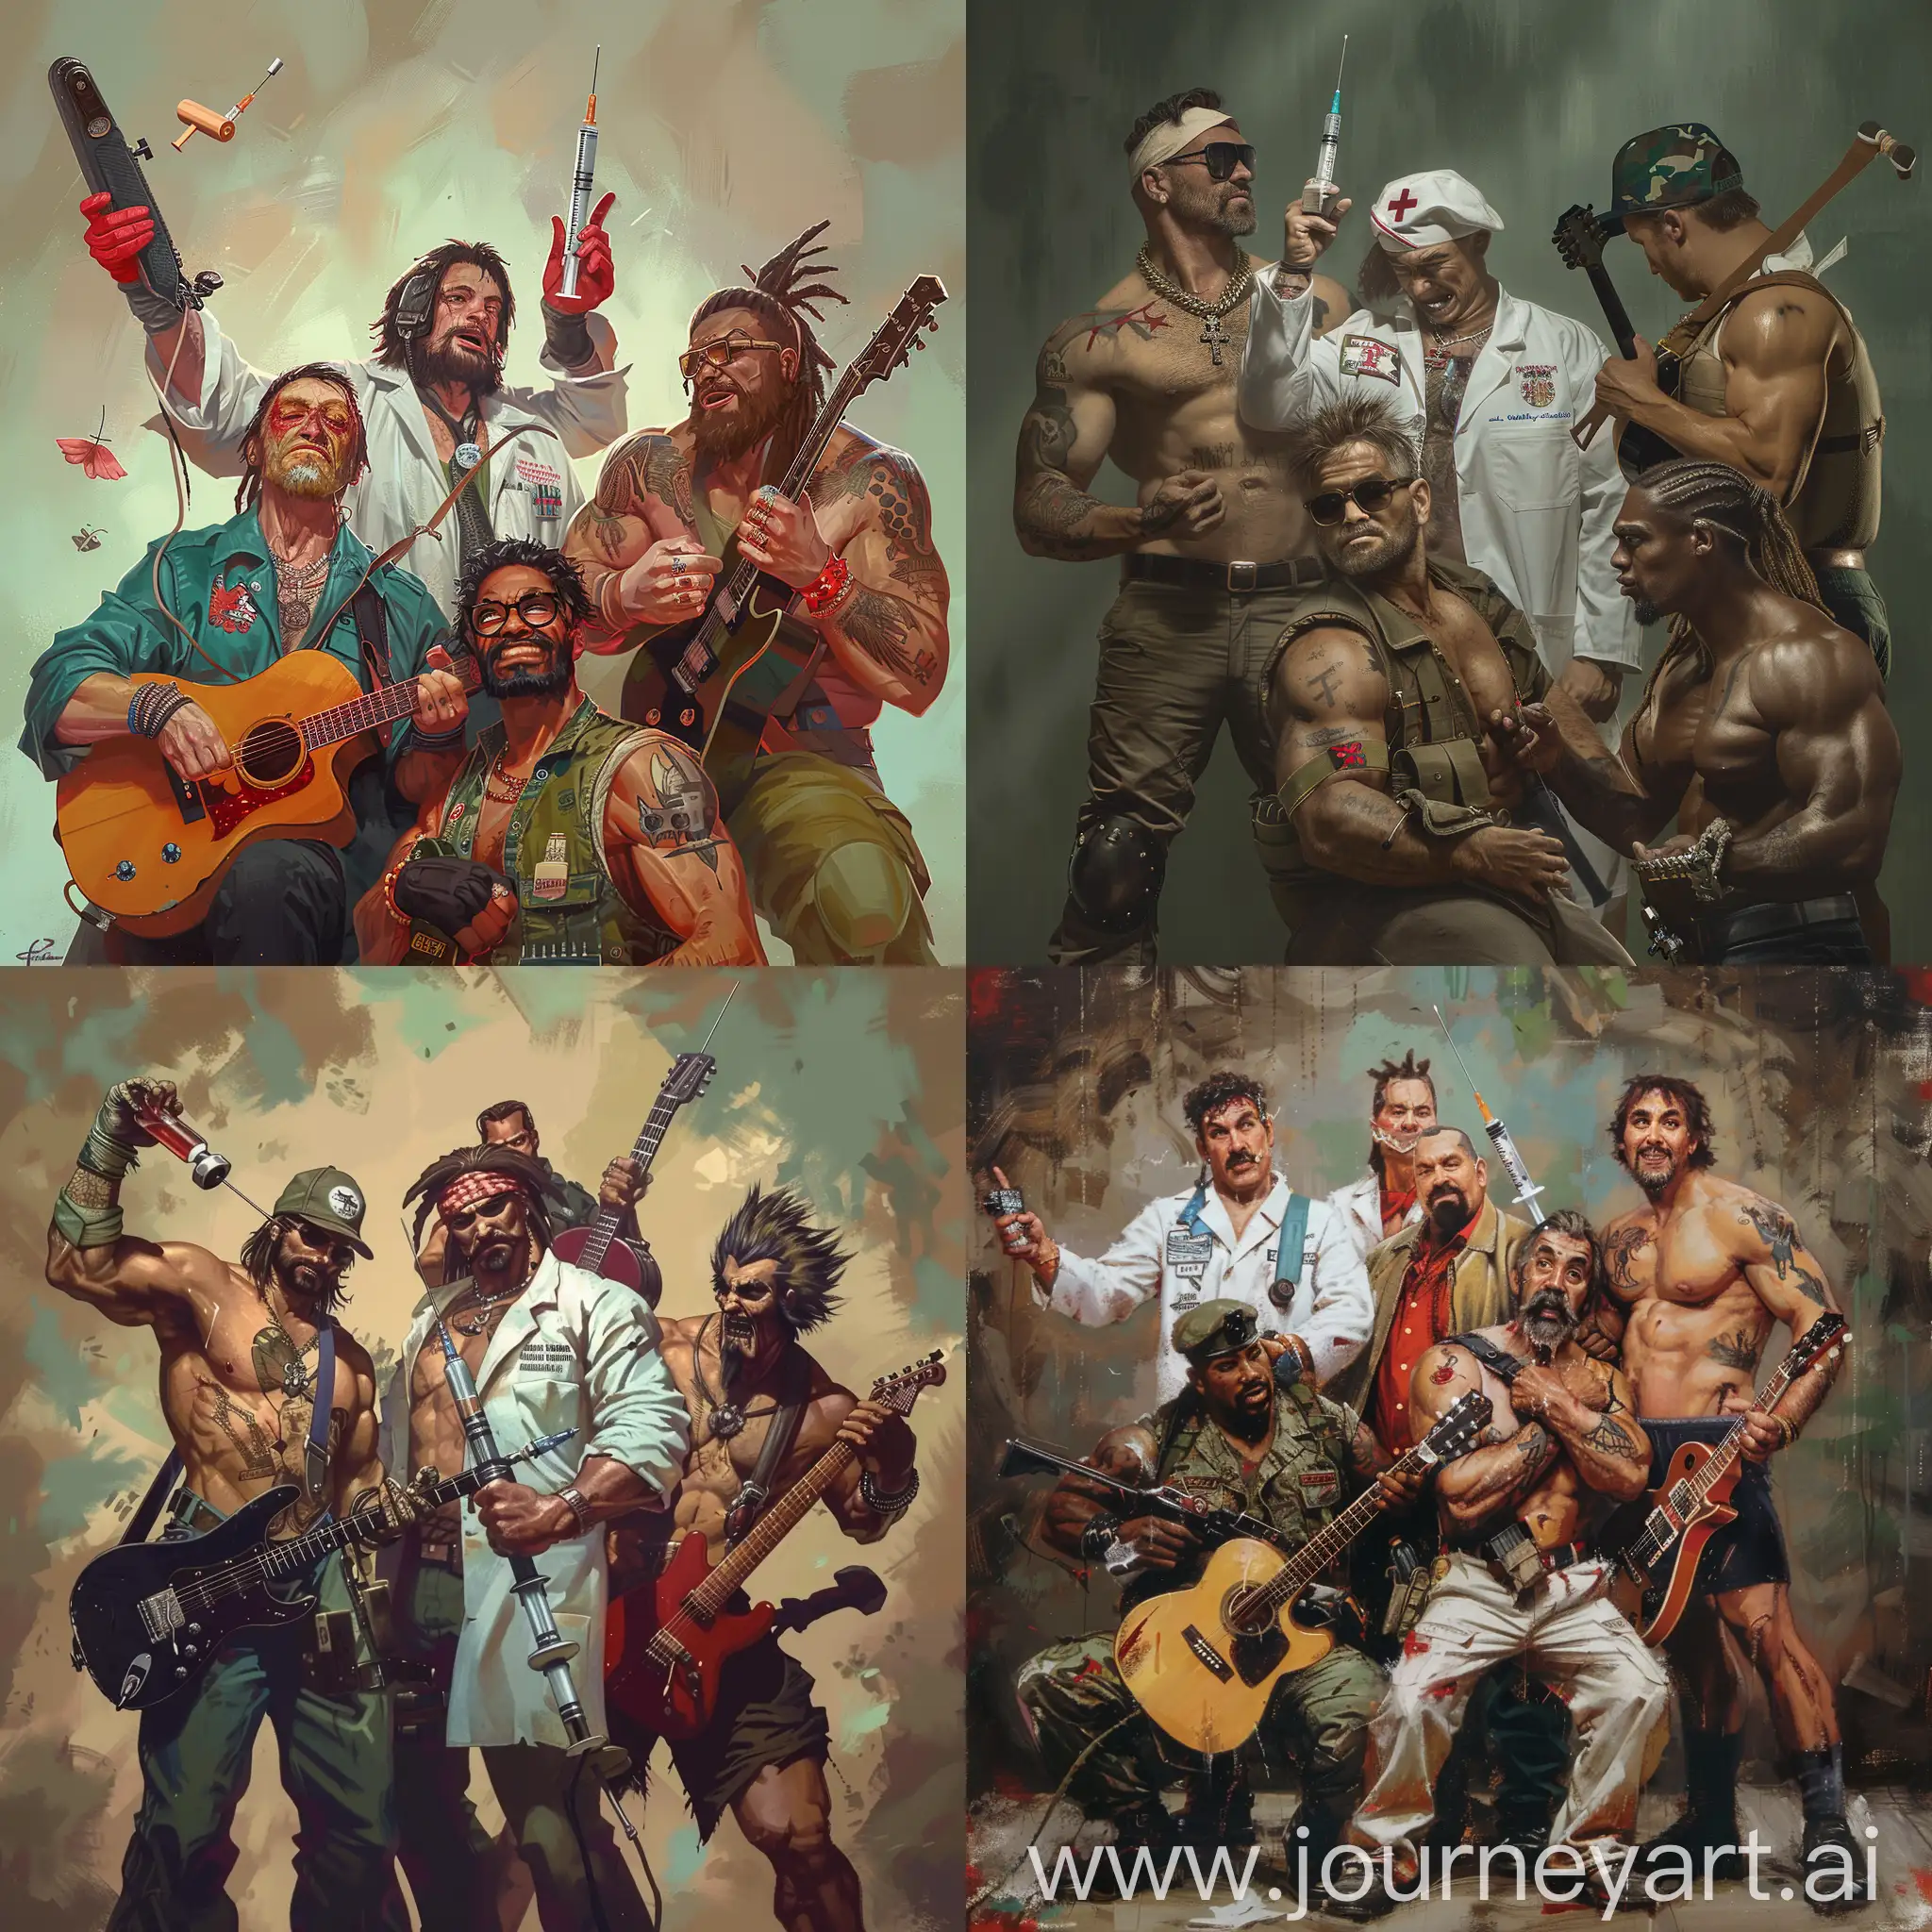 a group of friends made up of a rockstar male doctor, a hillbilly holding a syringe, a bodybuilder with a guitar and a short black man from the army